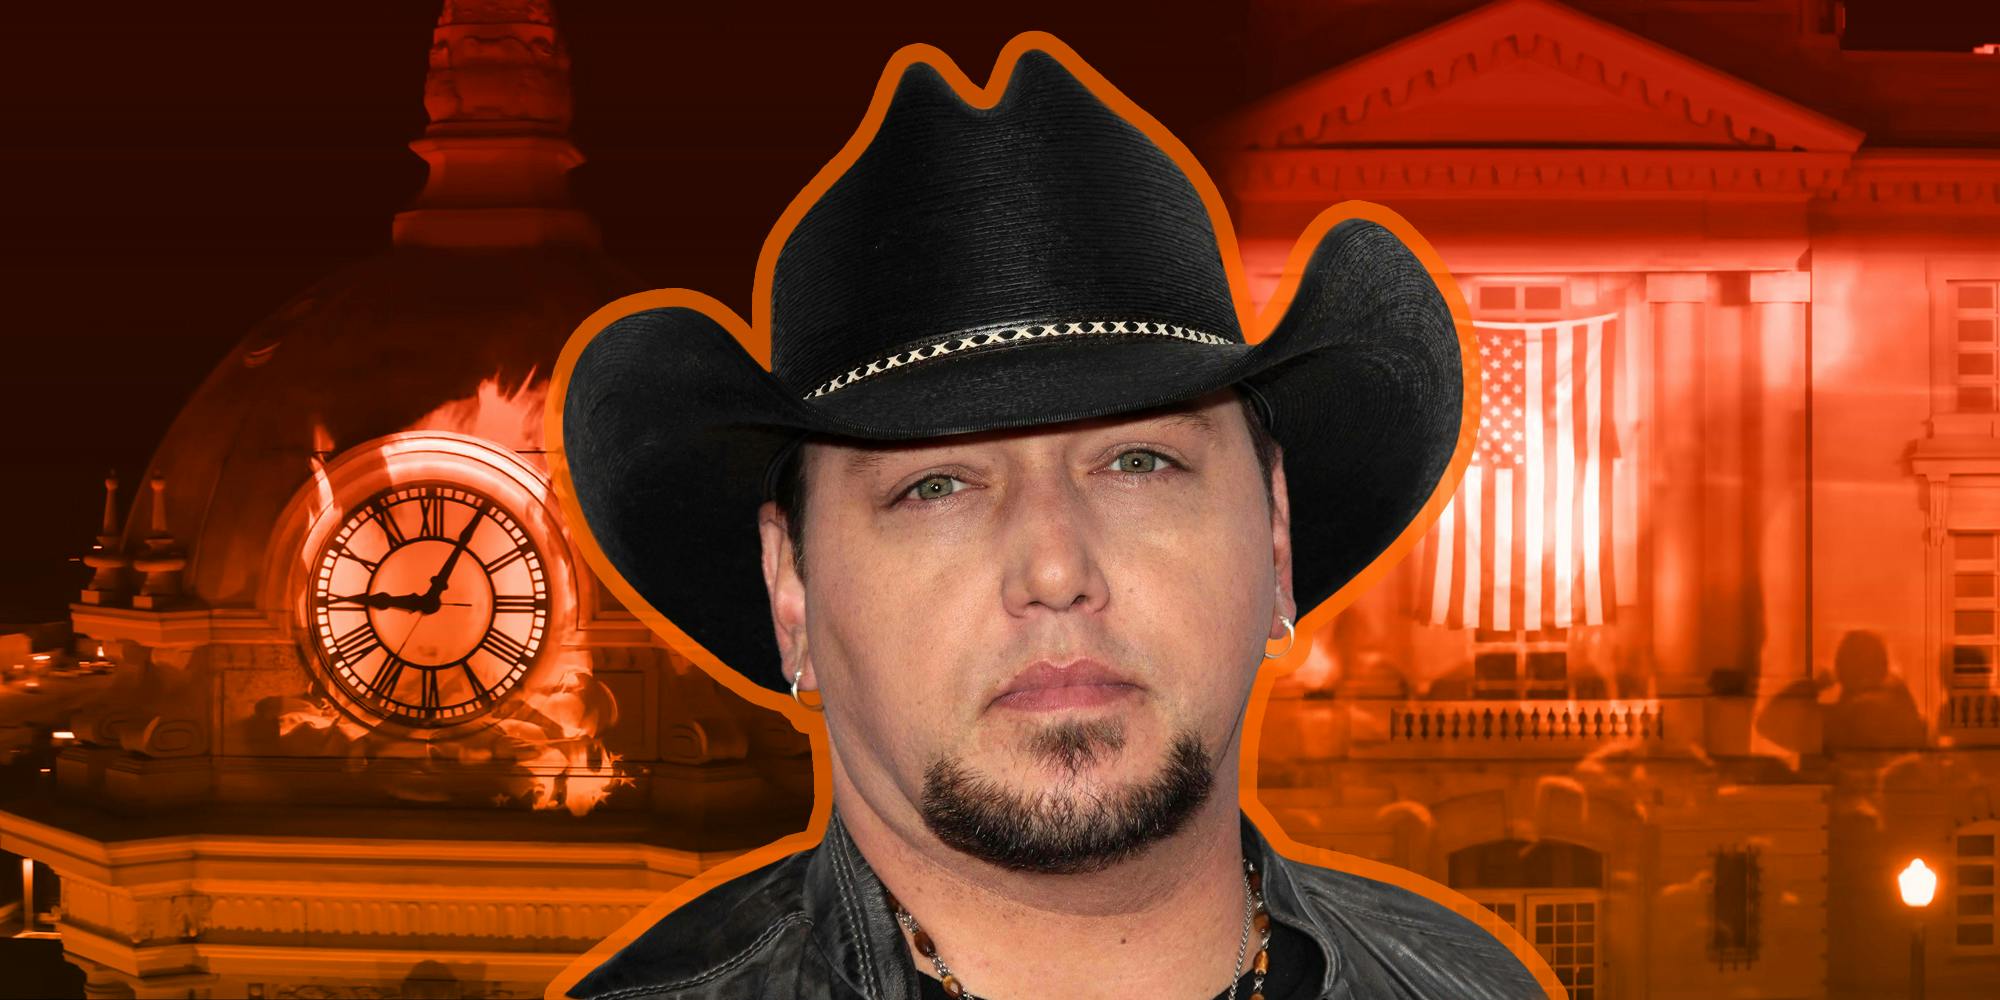 Try What in a Small Town, Exactly?: Jason Aldean Controversy Highlights the Pros and Cons of the Rise of Citizen Journalism